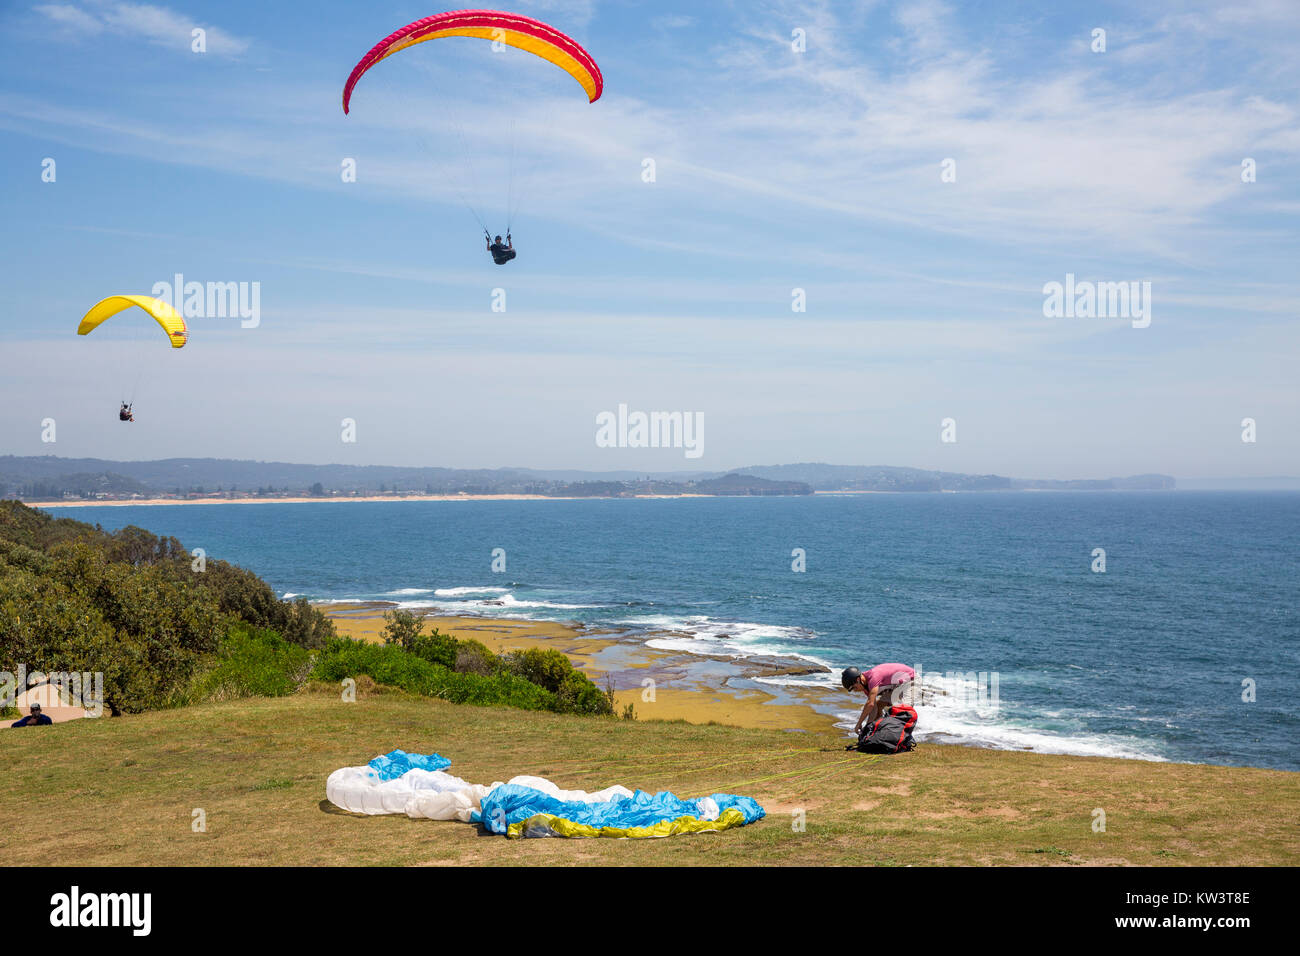 Hang gliding and paragliding is popular at Long Reef aquatic reserve on Sydney northern beaches,Australia Stock Photo